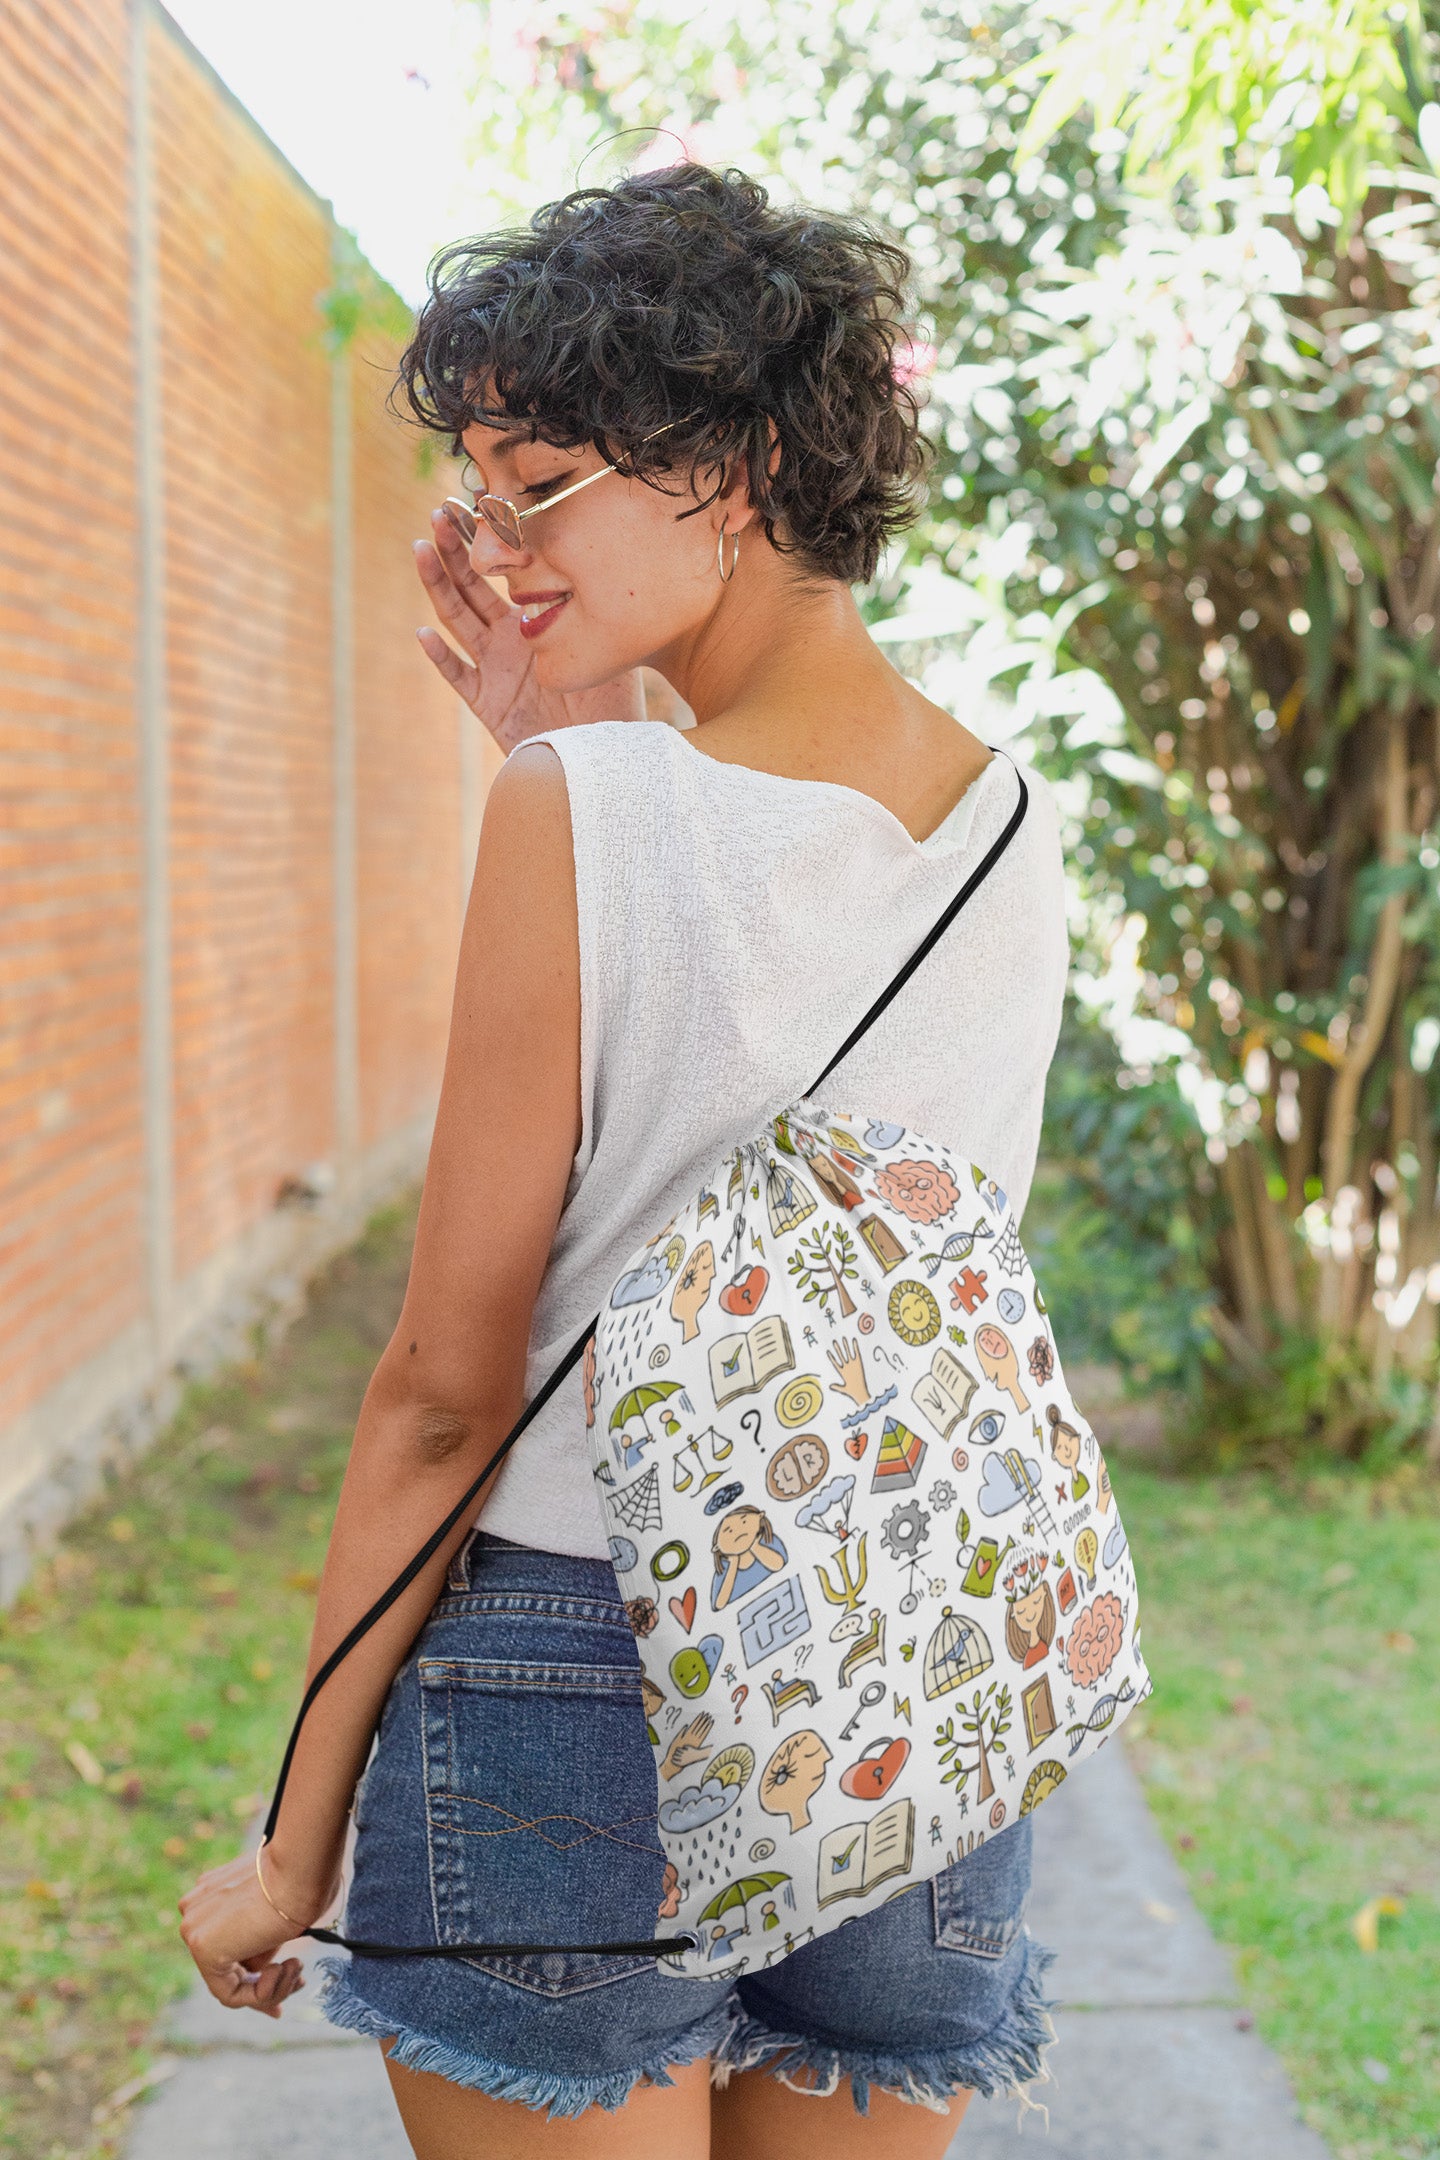 Drawstring bag with psychology print featuring a short haired girl looking over her shoulder